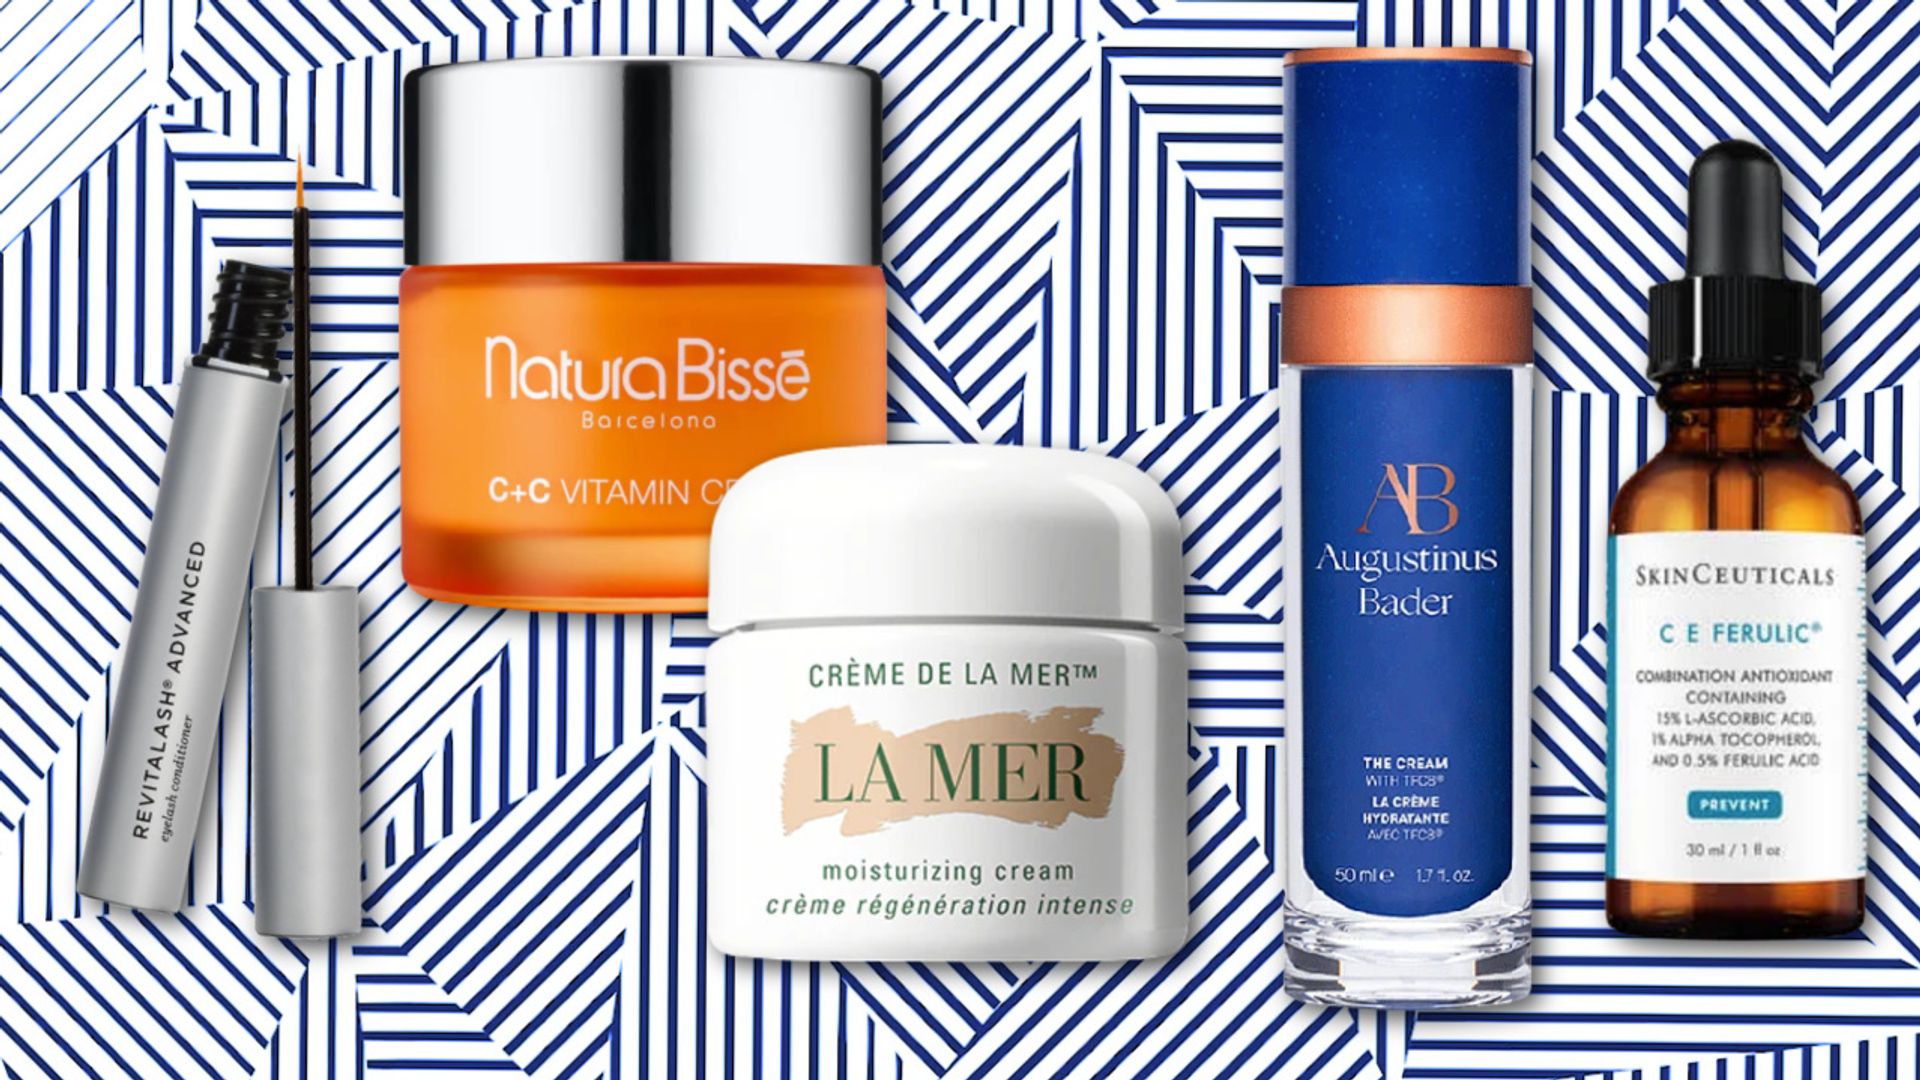 Have a beautiful skin with our 4 expert brands